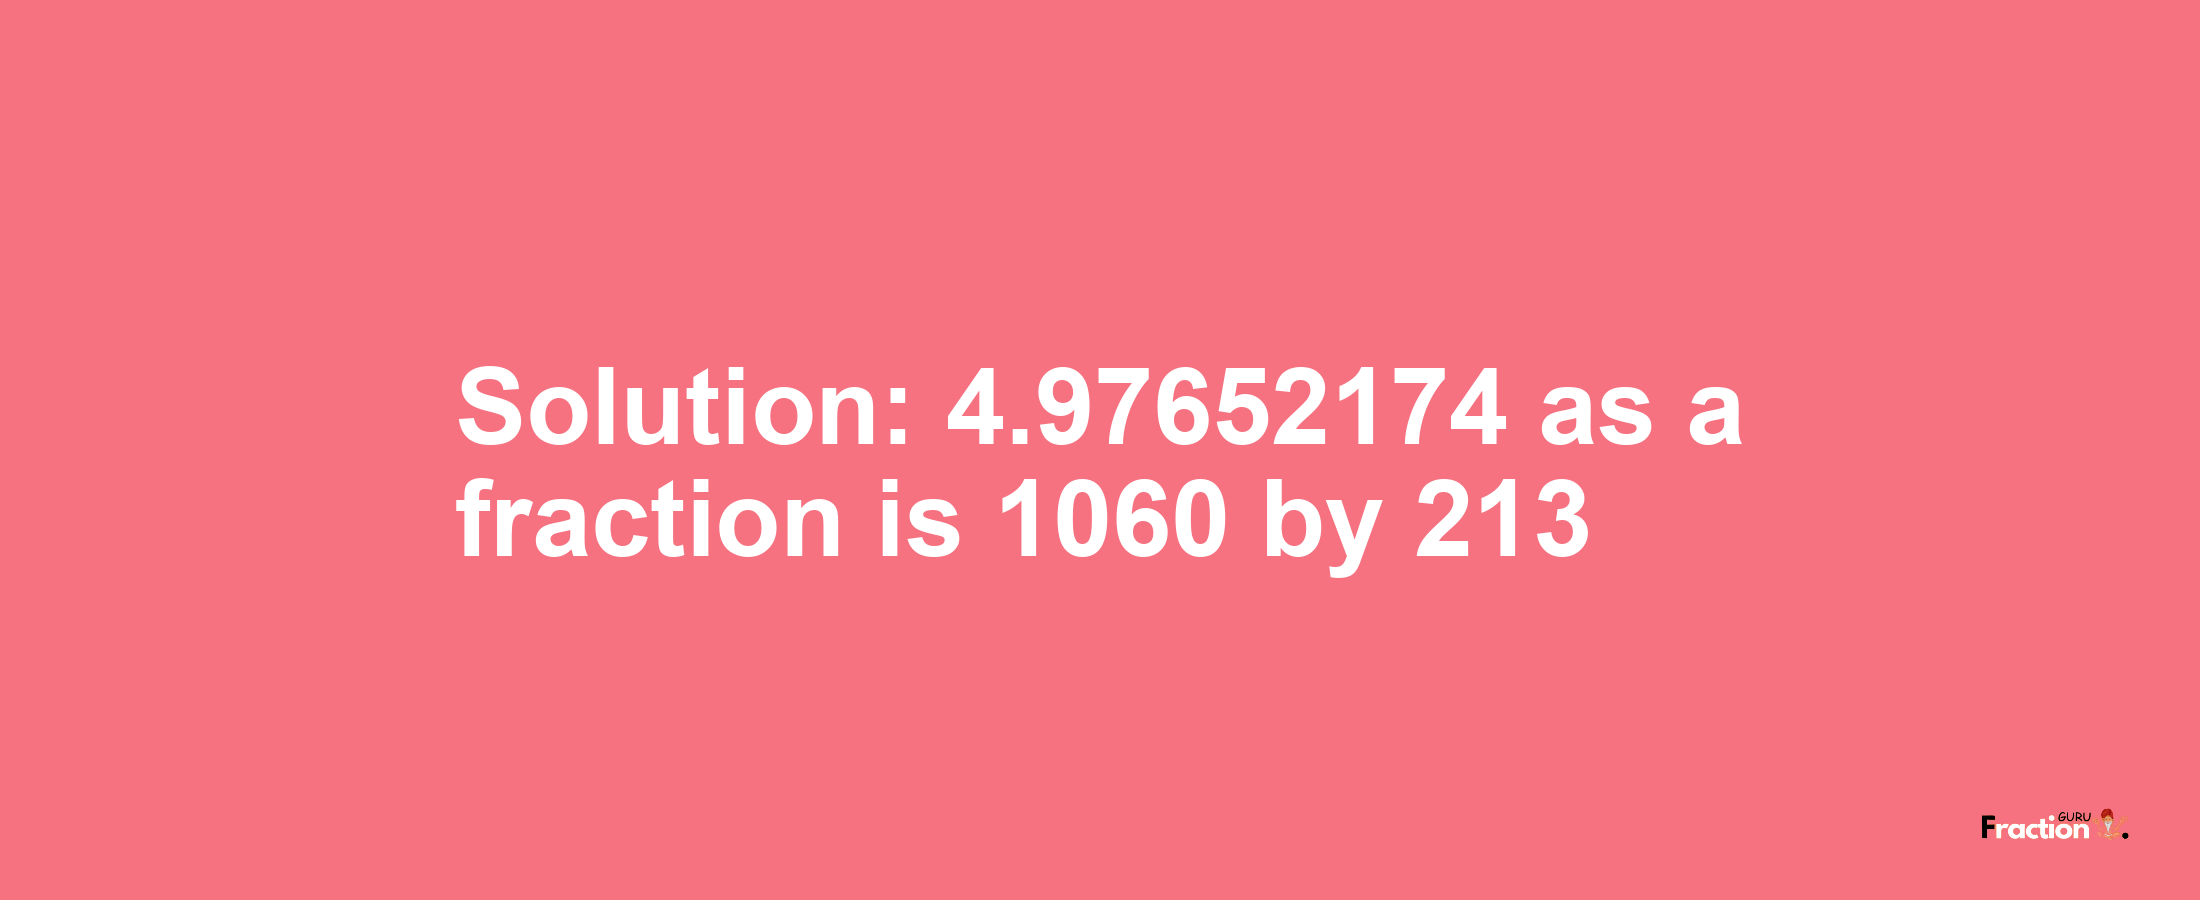 Solution:4.97652174 as a fraction is 1060/213